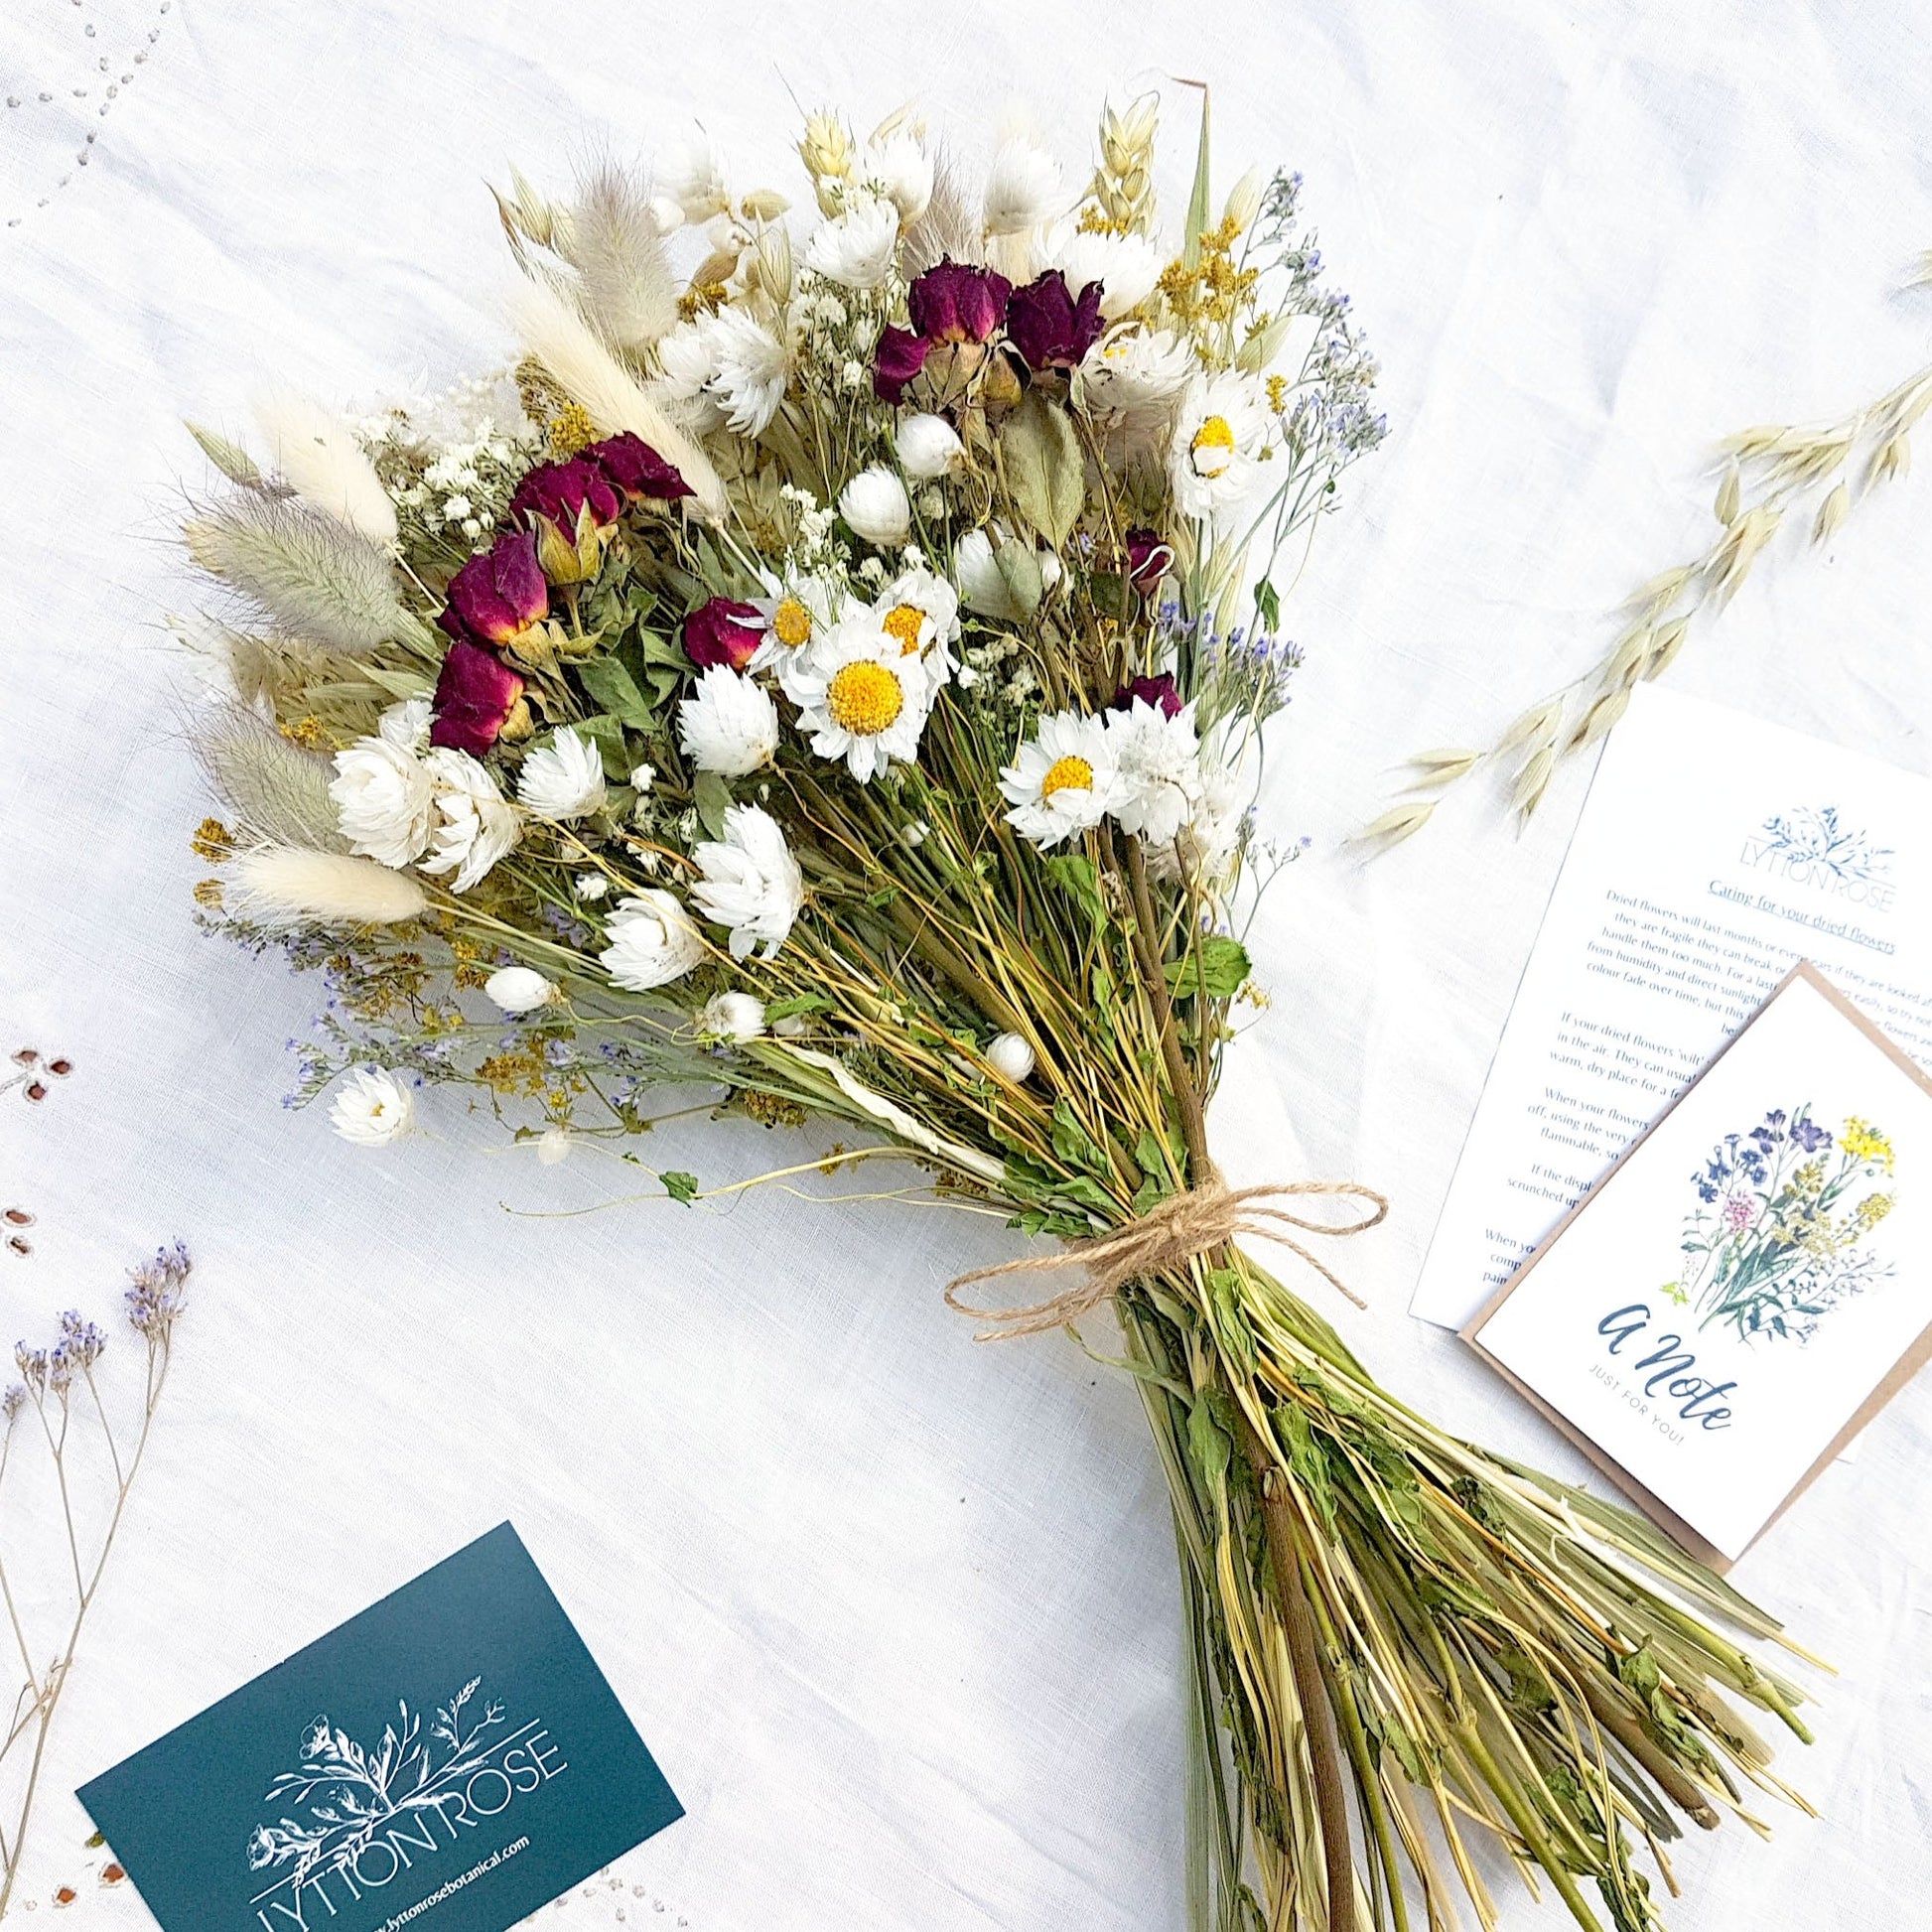 A dried flower bouquet is laid on a white linen background. It has small red roses, white daisies with yellow centres, blue toned purple sea lavender and pretty white gypsophila among other grasses and fillers. In the background you can see the optional gift card and instructions for caring for dried flowers. It is tied with a pretty twine binding.